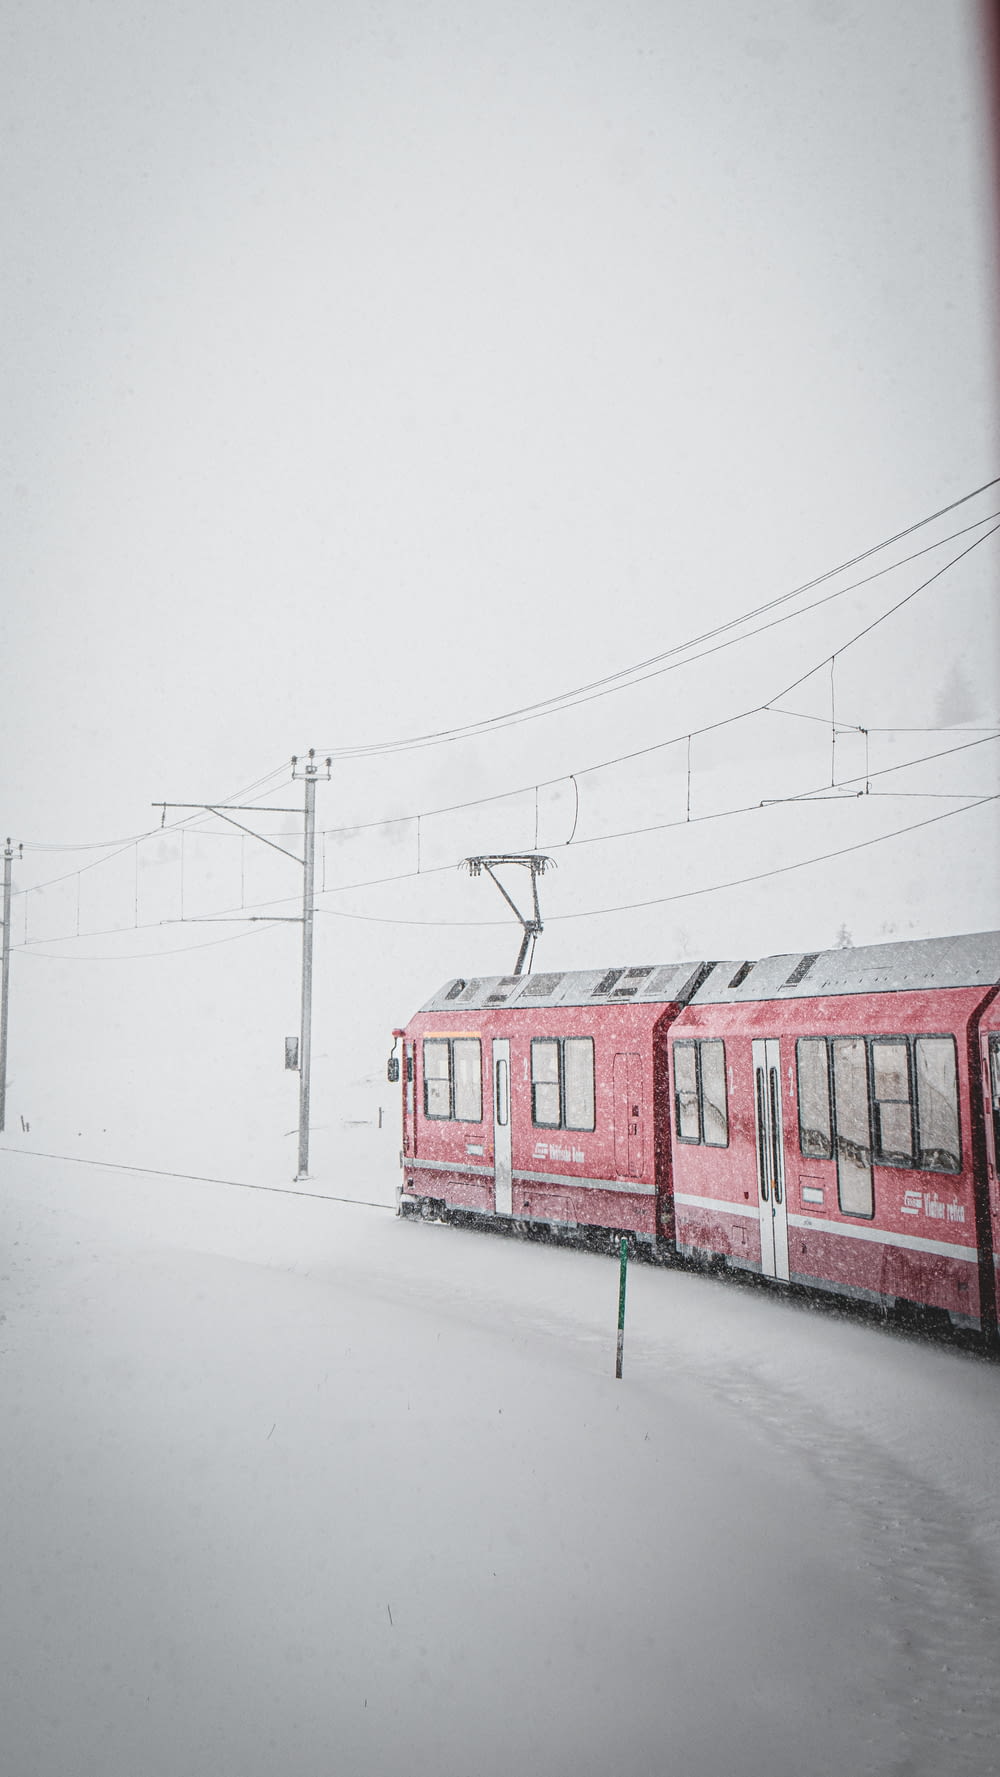 a red train traveling down train tracks covered in snow